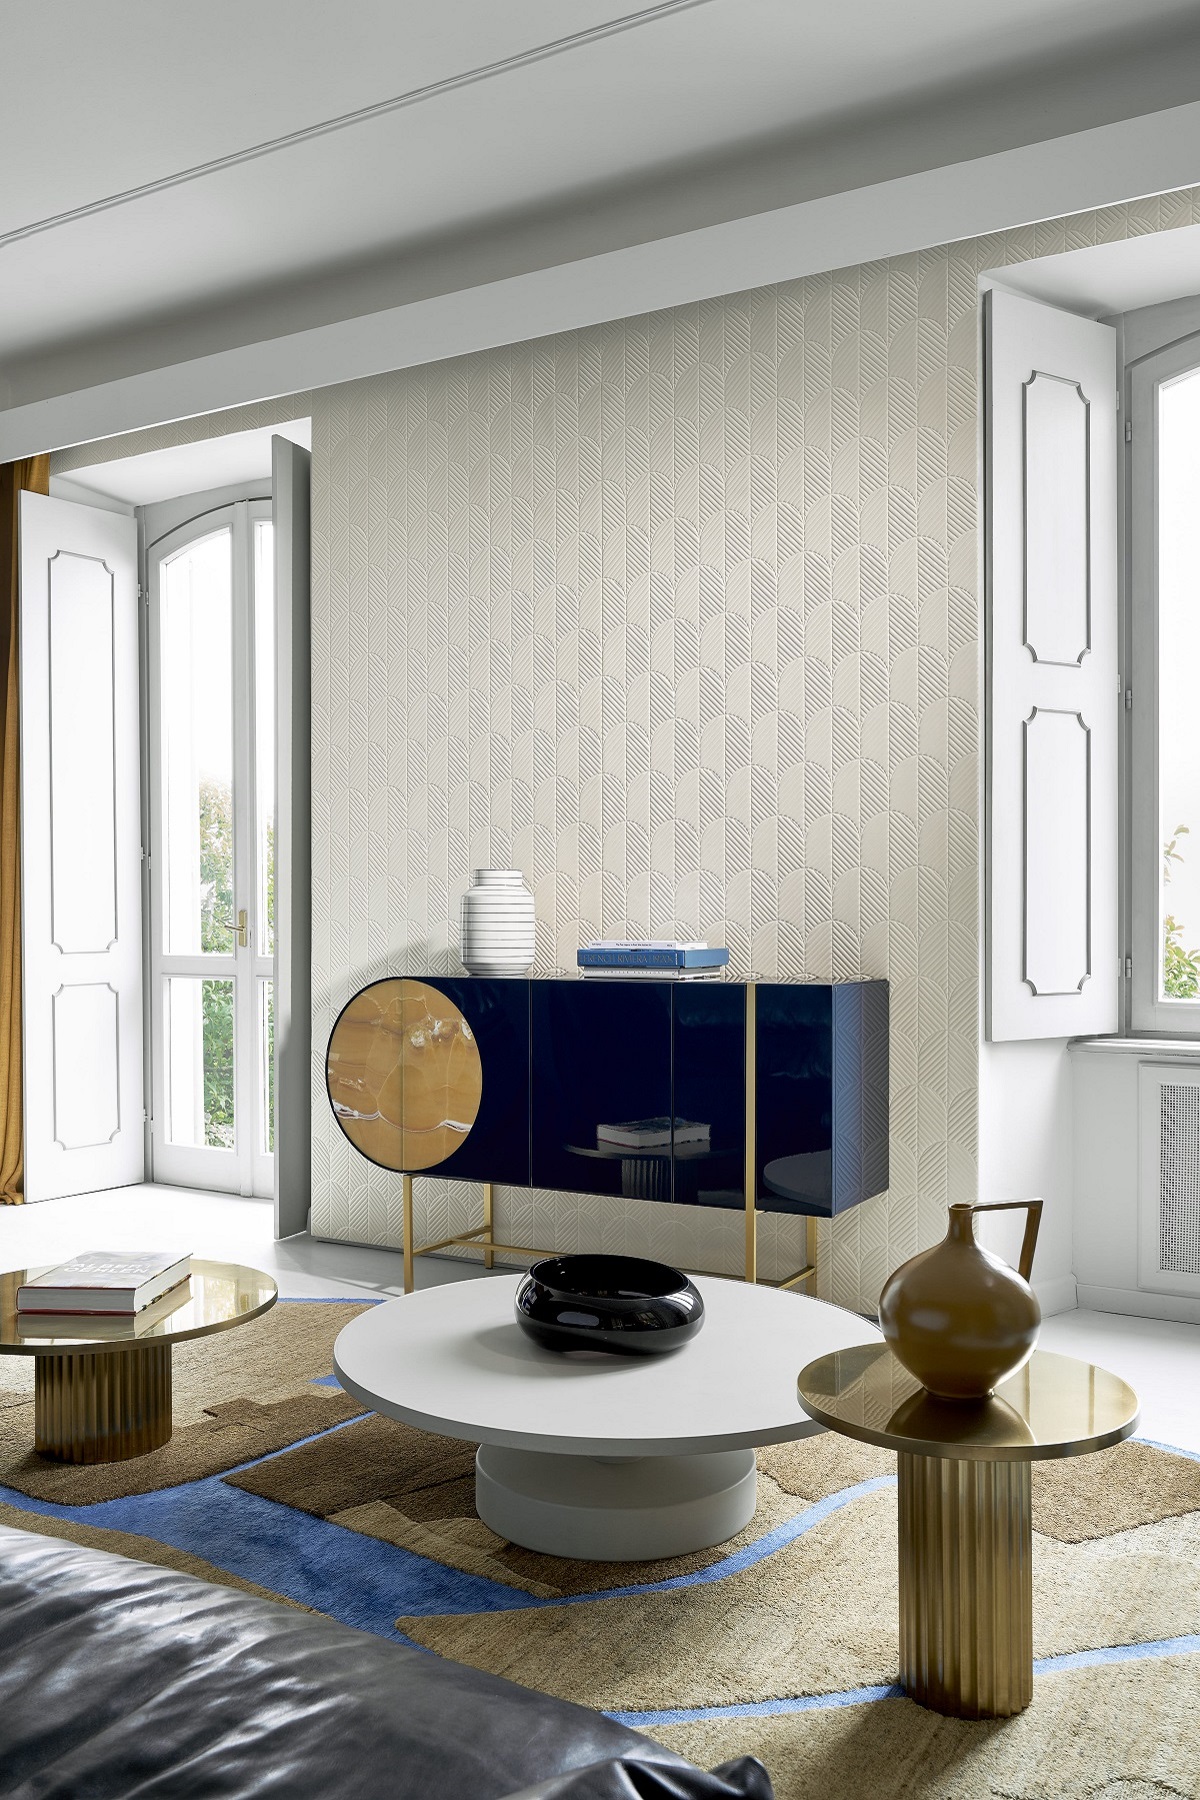 period style interior with contemporary furniture and Arte Anicca wallcovering